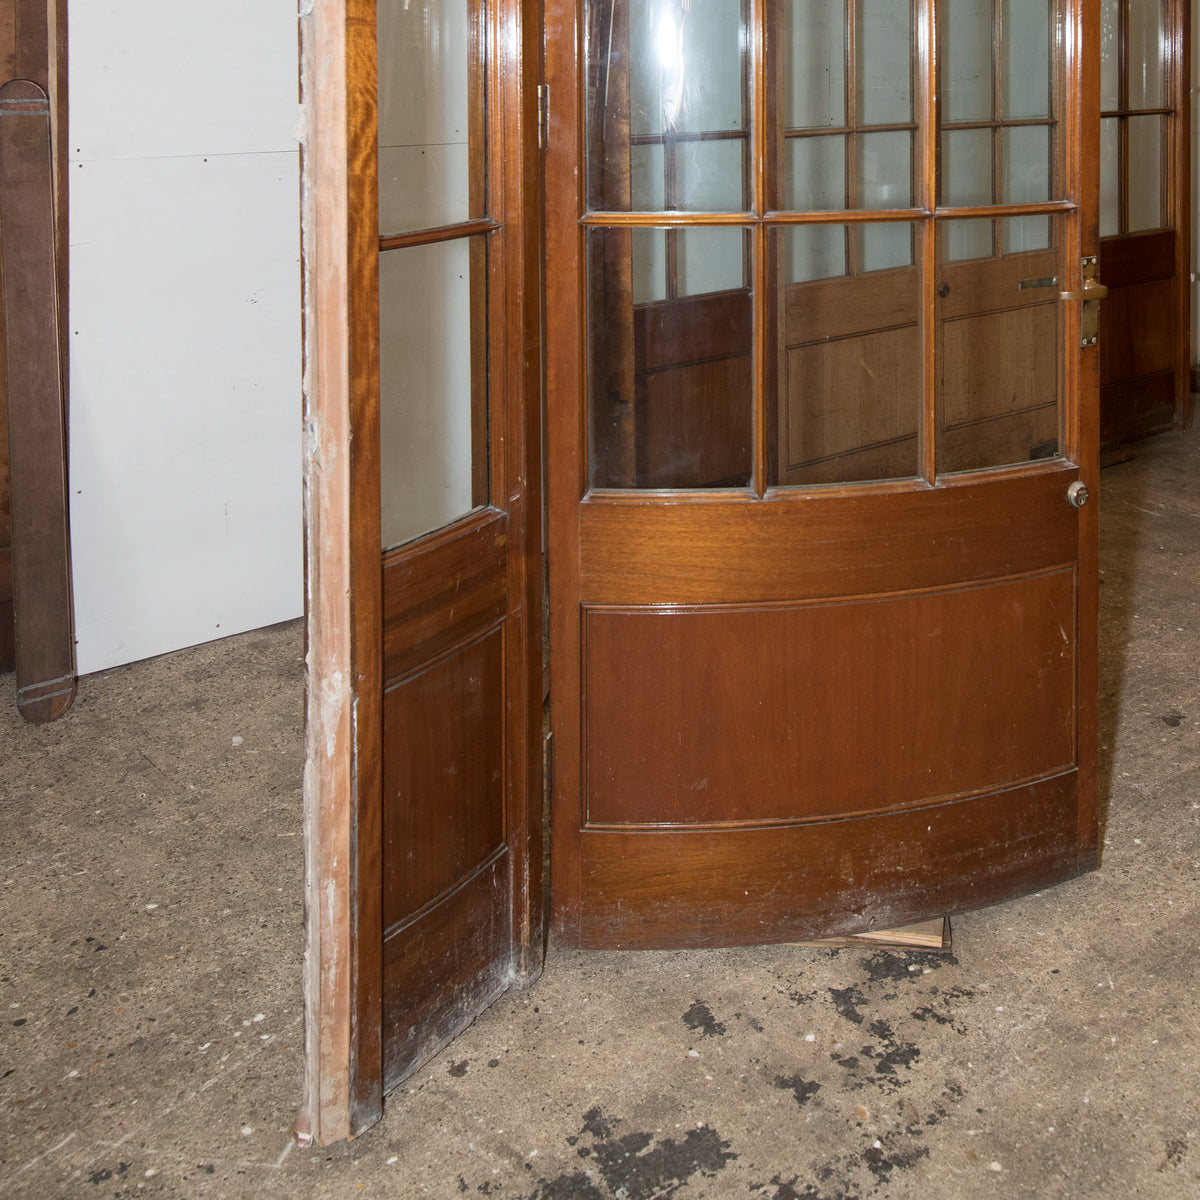 Antique Art Deco Grand Modular Glazed Entrance with Curved Wings | The Architectural Forum